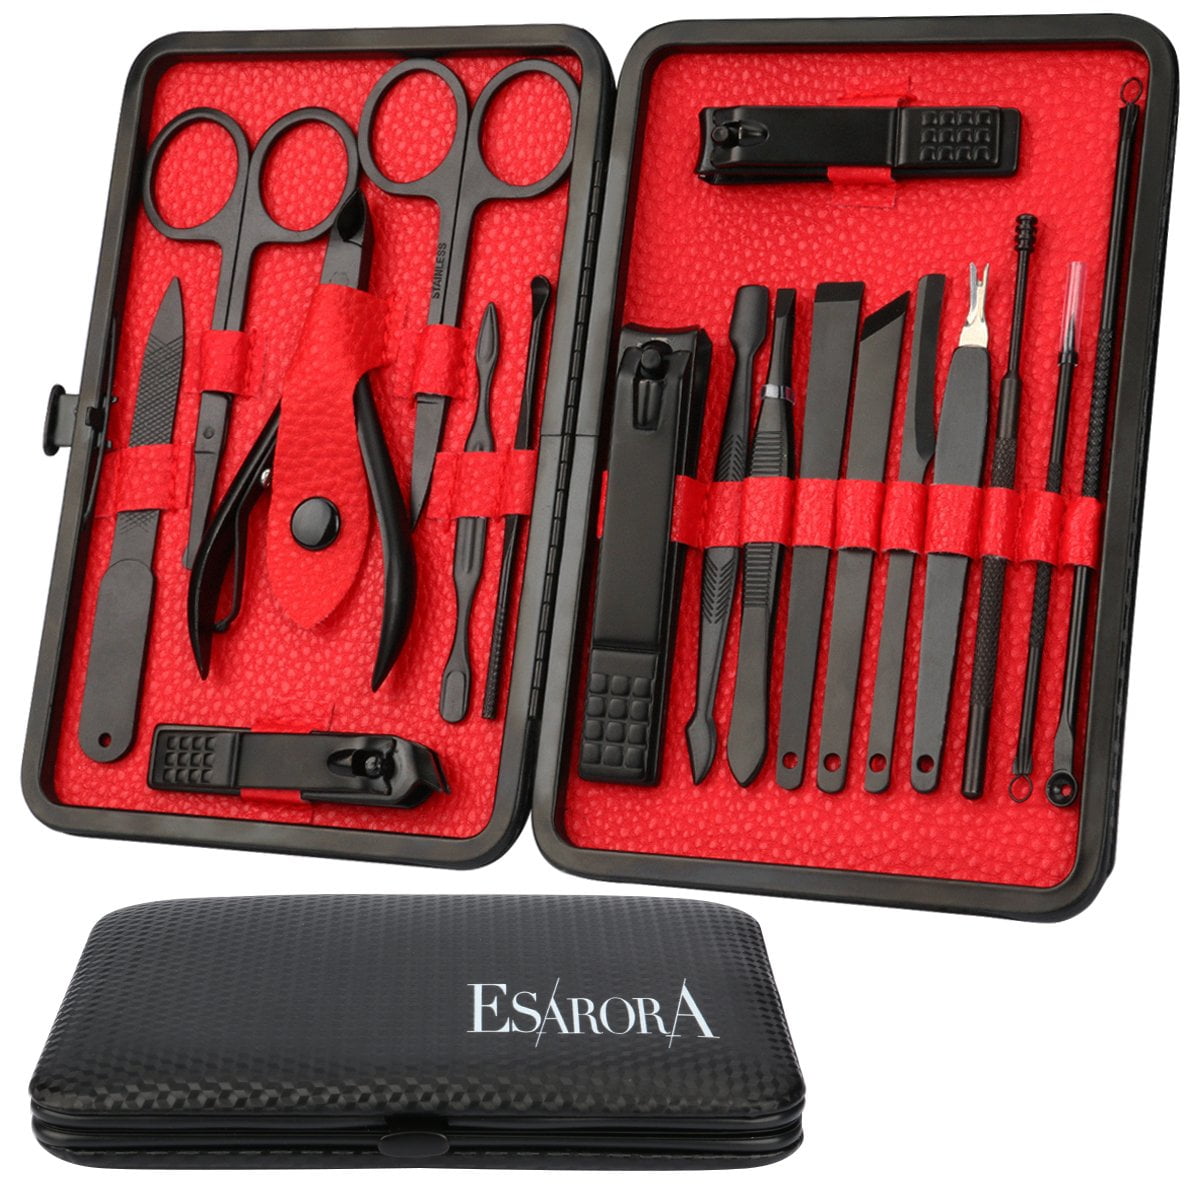 WUSI Manicure Set Pedicure Kit Nail Kit-19 in 1 Stainless Steel Manicure Kit,  Professional Grooming Kits, Nail Care Kit with Luxurious Travel Case  (Black) 